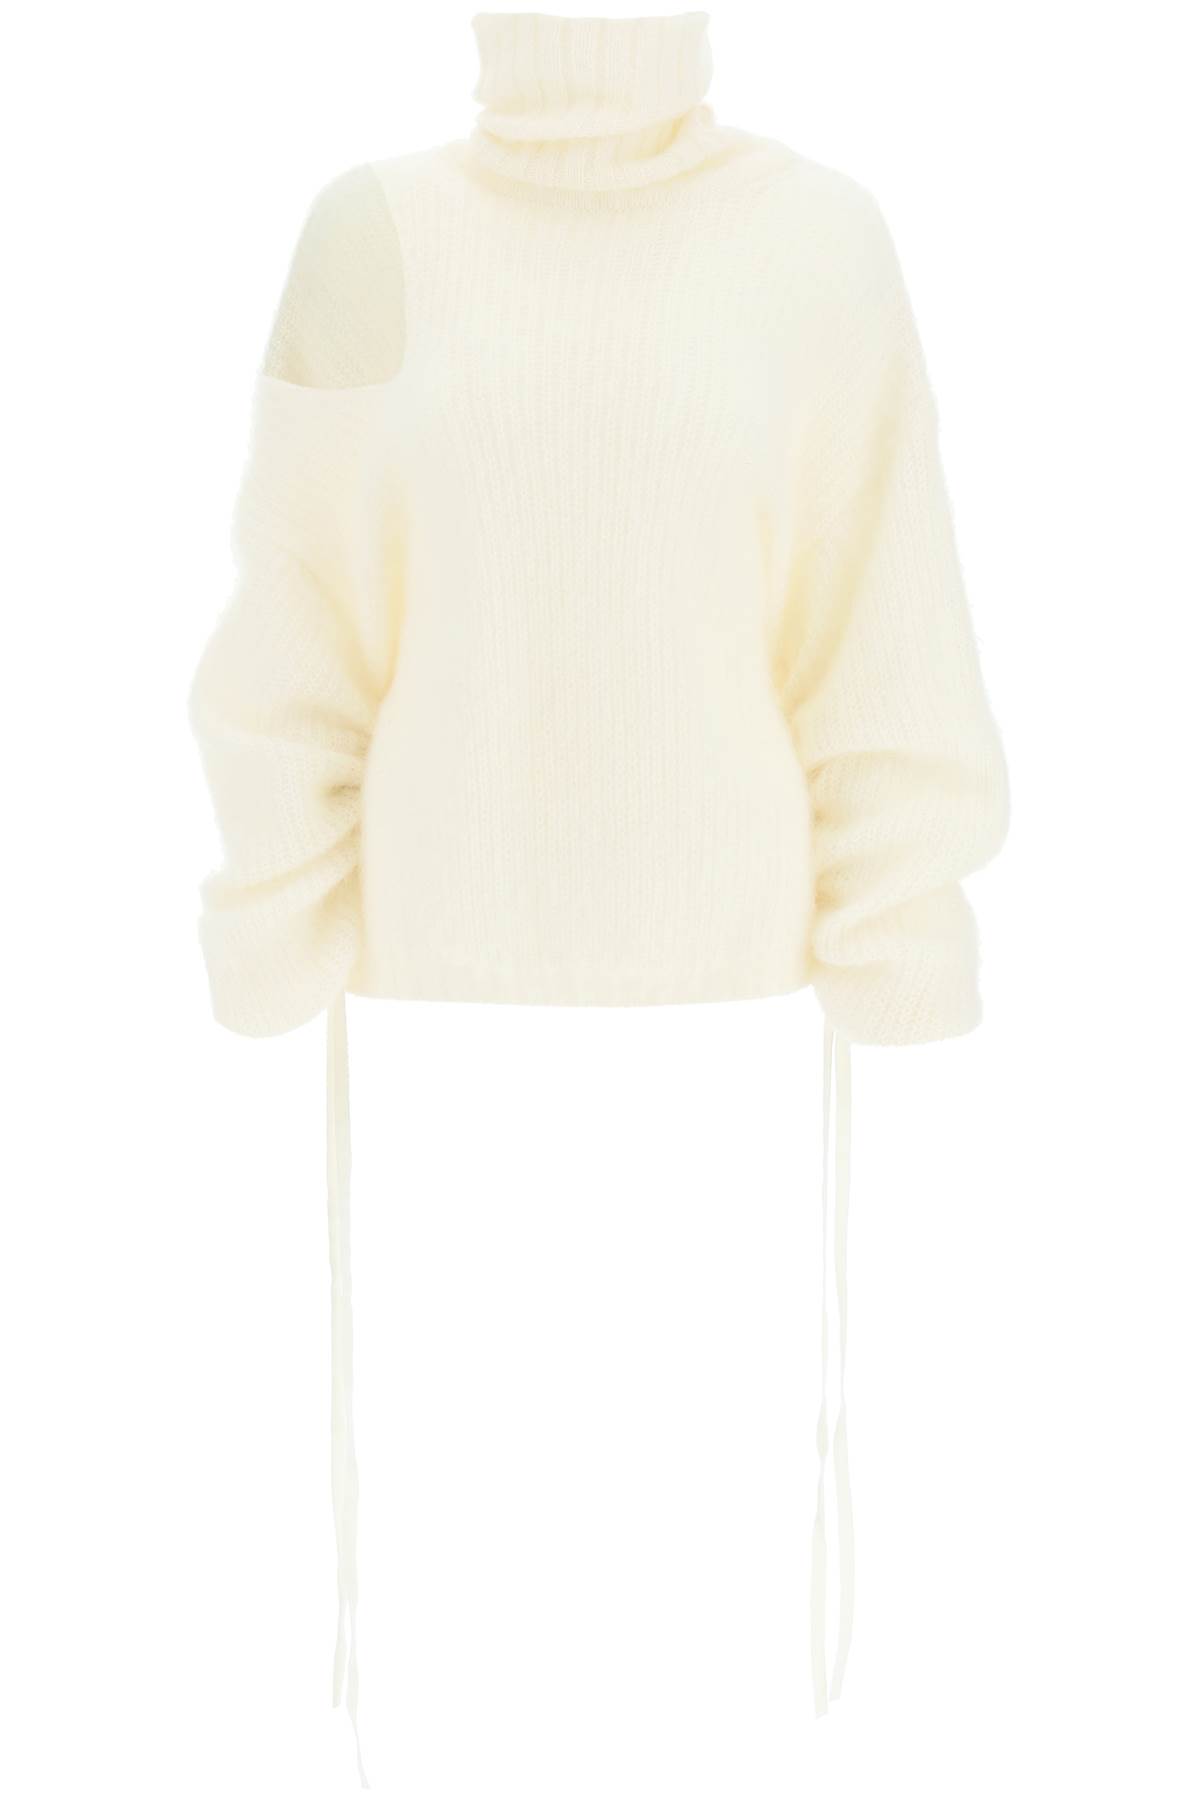 ANDREADAMO Oversized Sweater With Cut-out